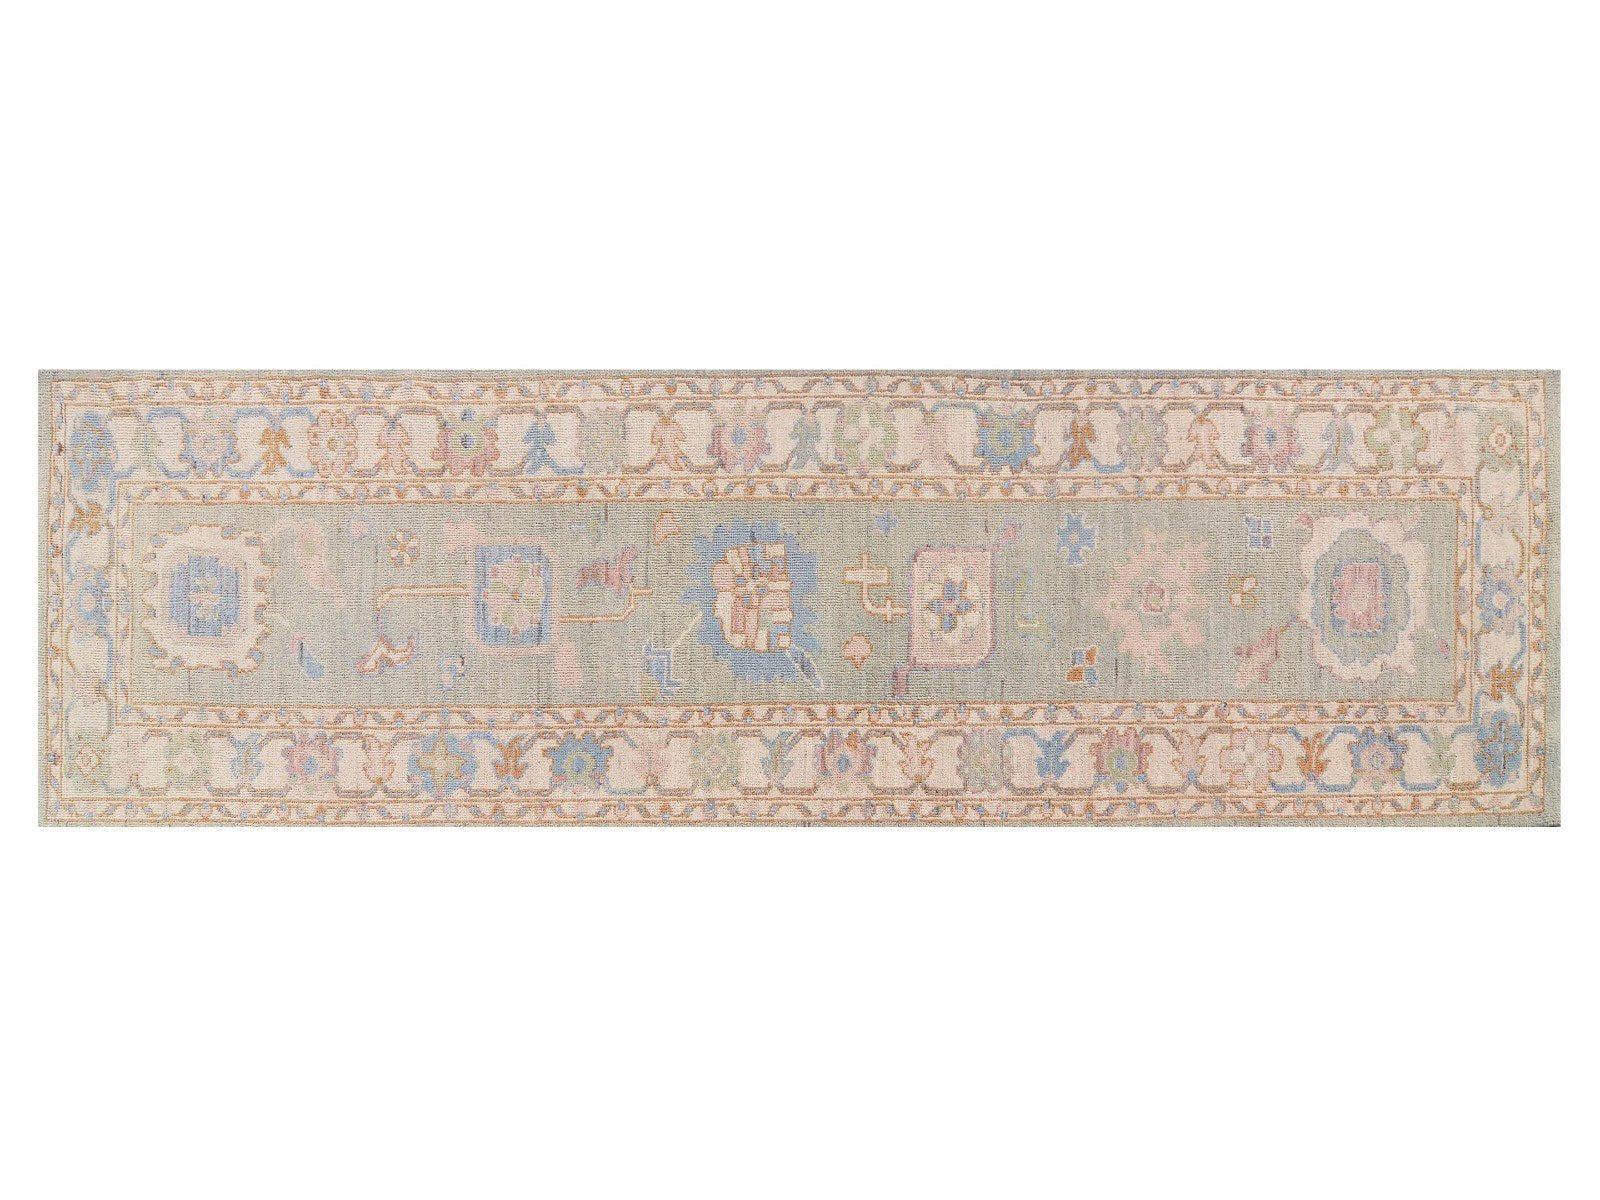 3x12 Turkish Oushak runner rug in a soft green with an ivory border, hand-knotted and ideal for hallways